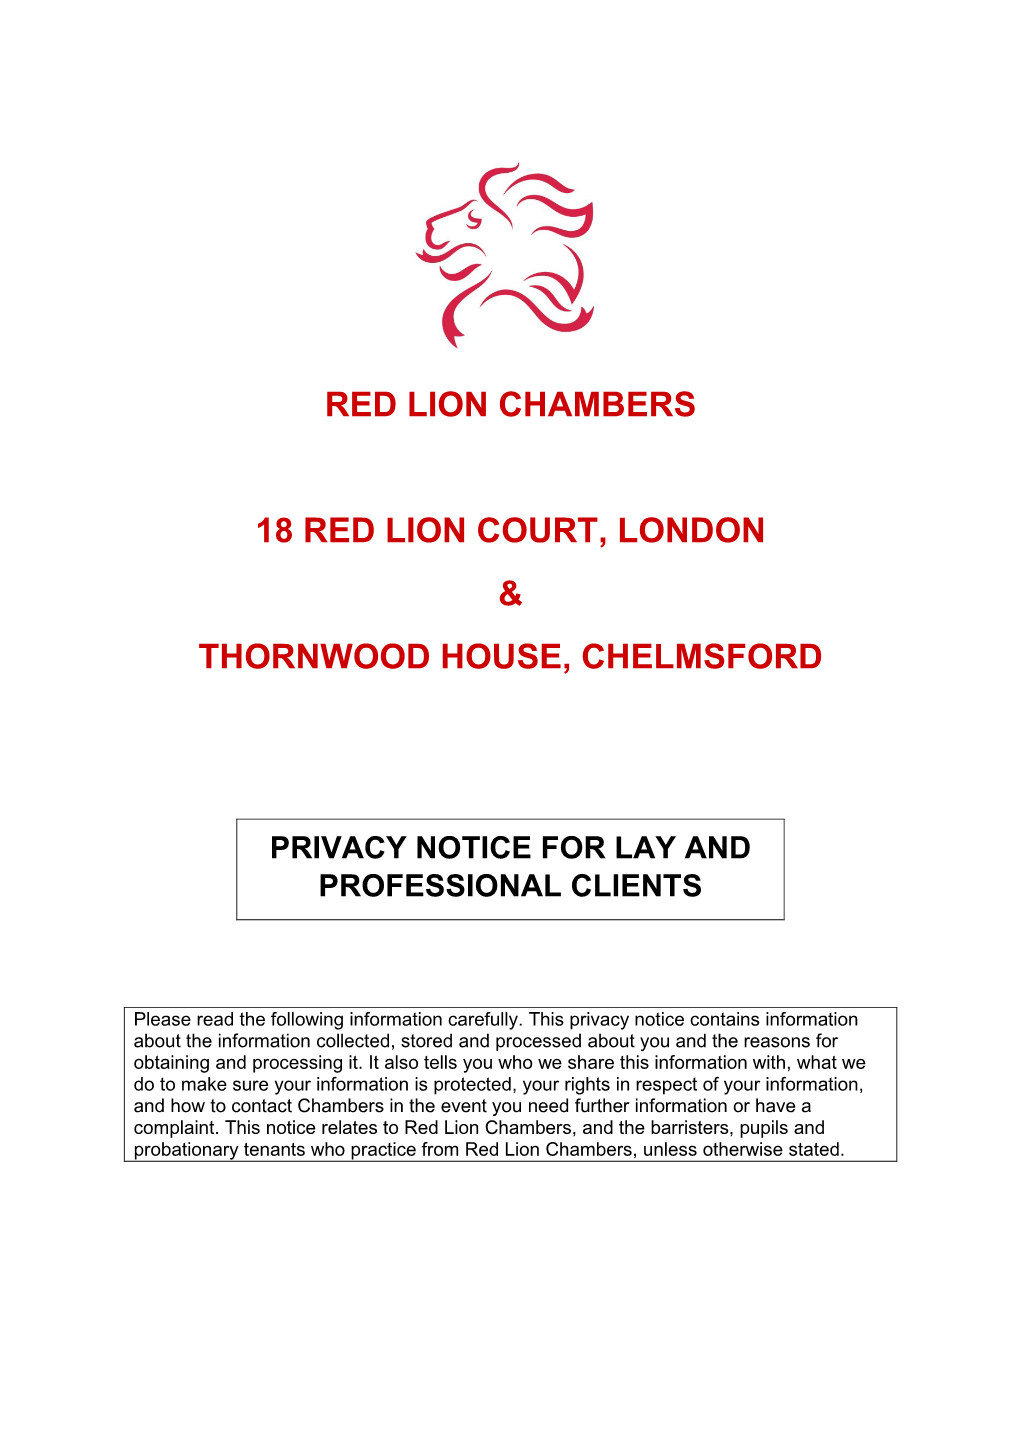 Red Lion Chambers 18 Red Lion Court, London & Thornwood House